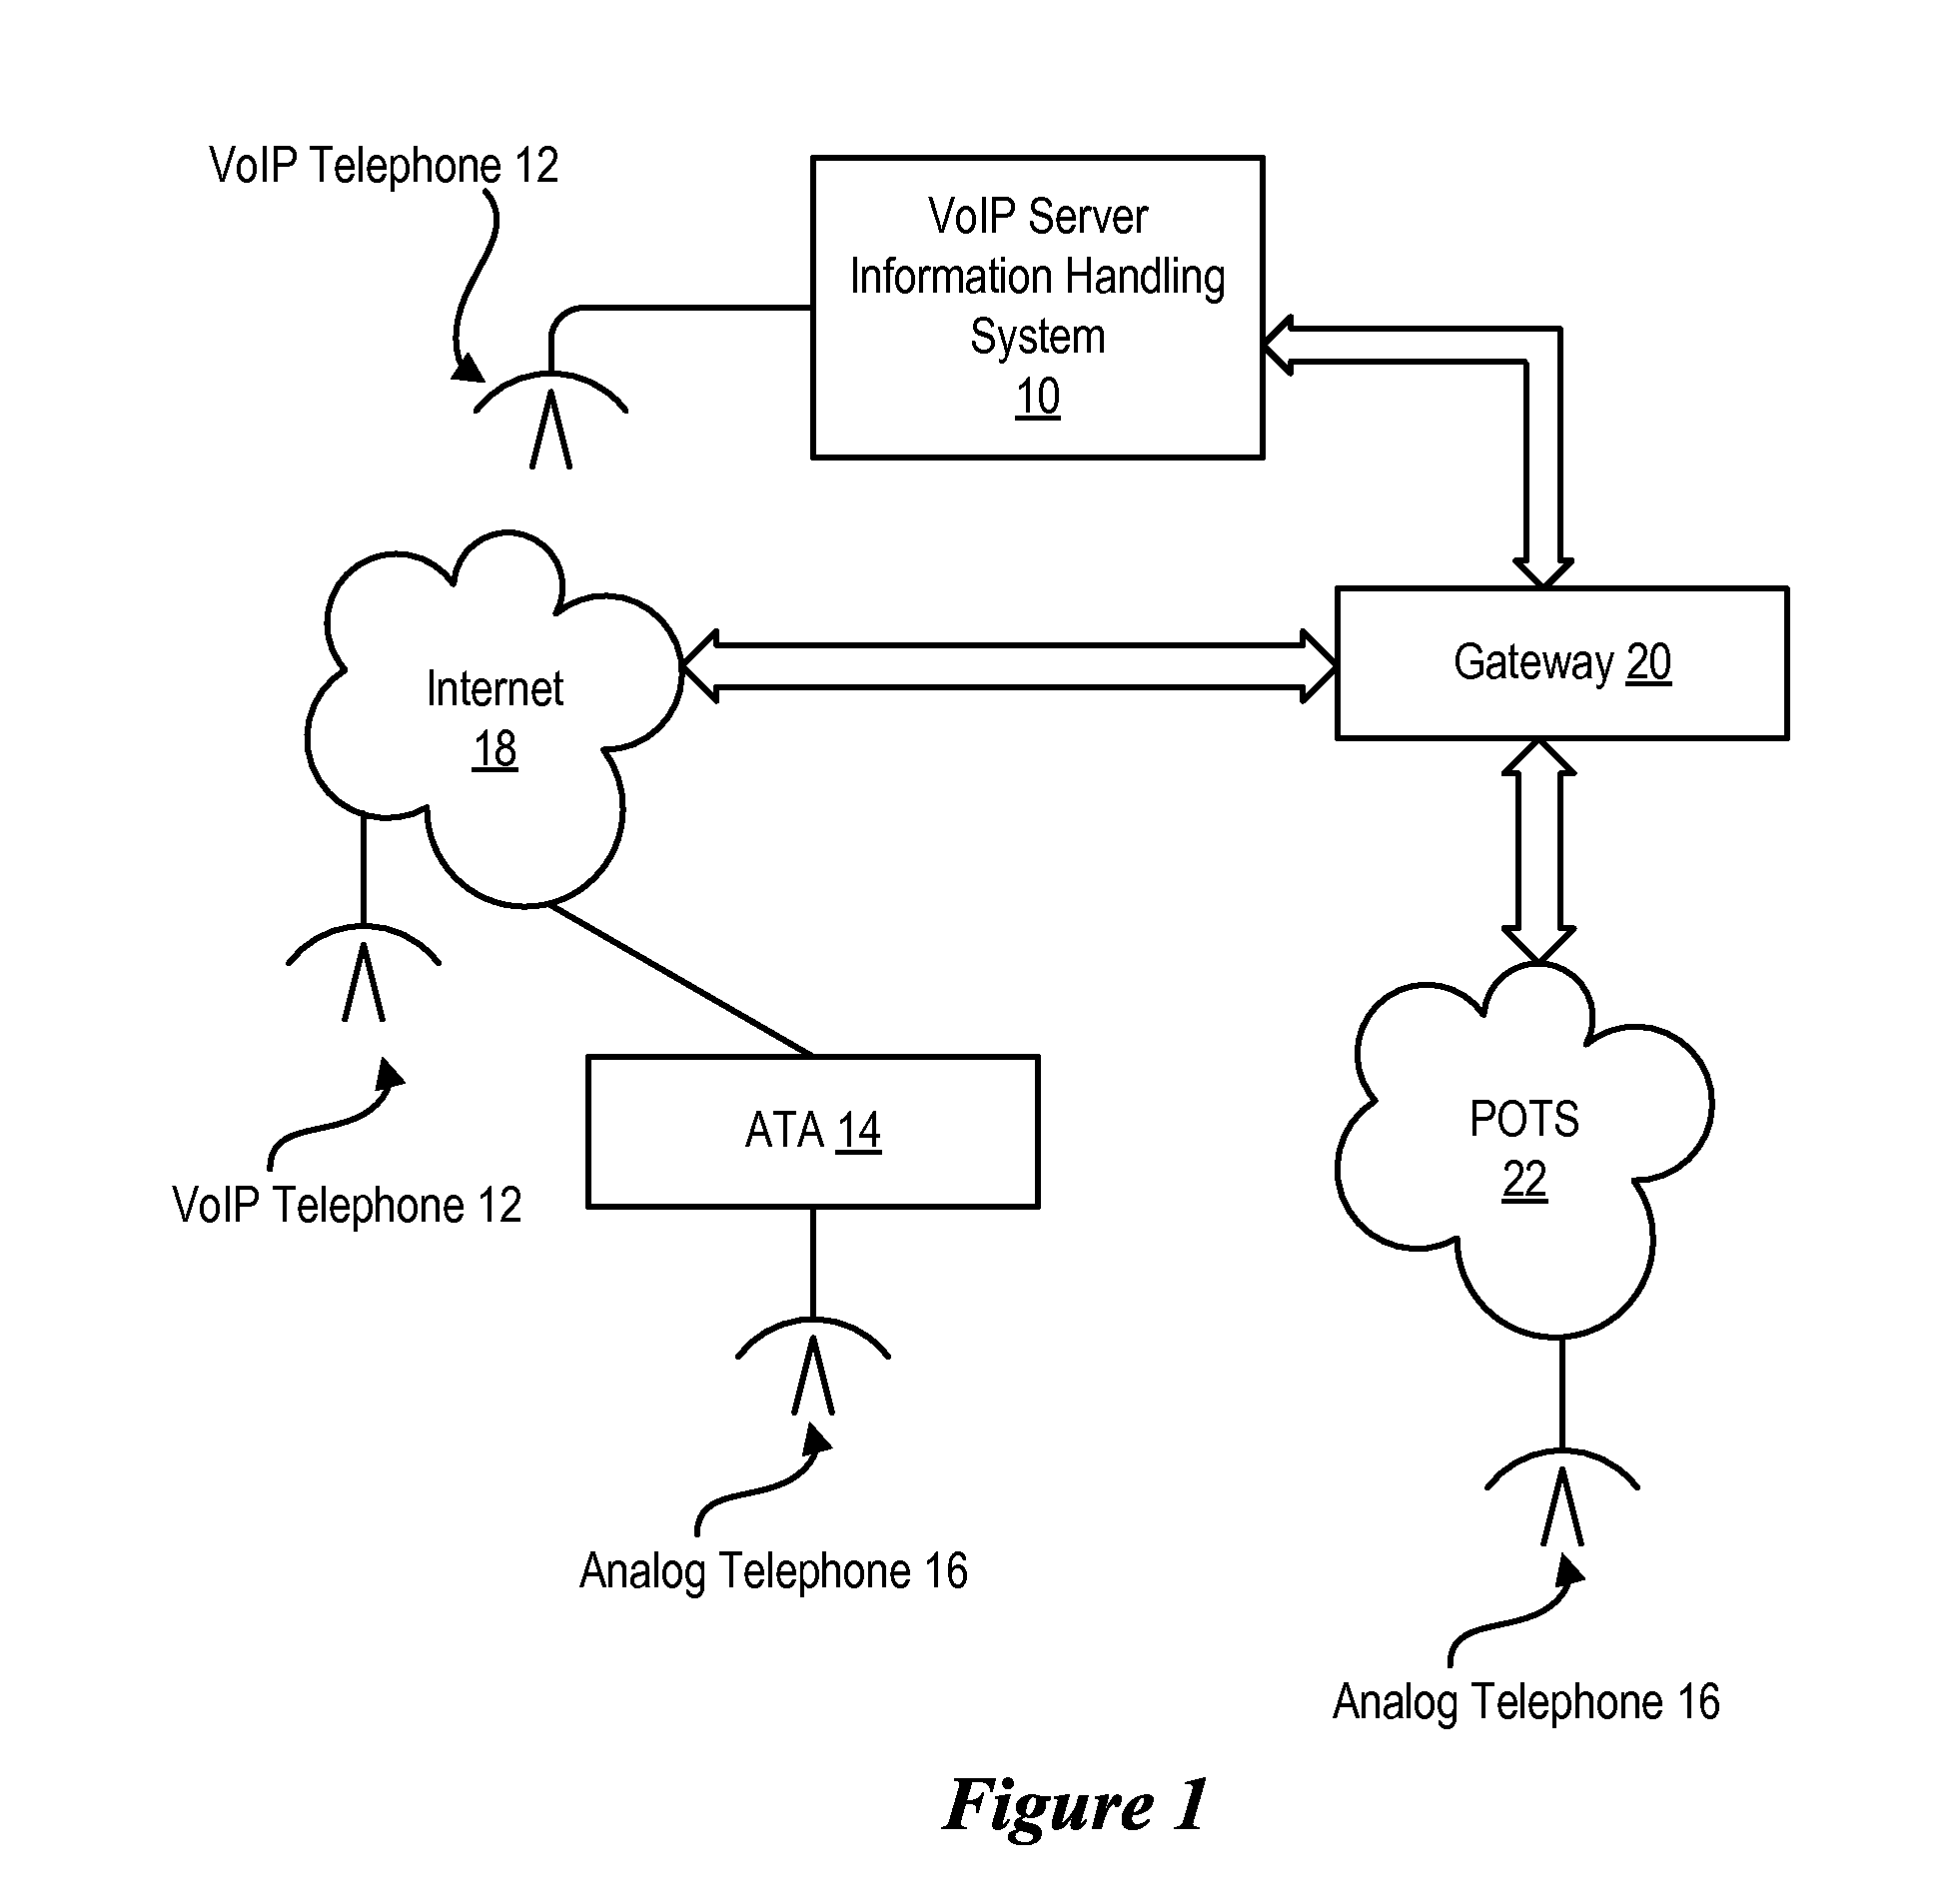 System and Method for Configuring Voice Over IP Devices